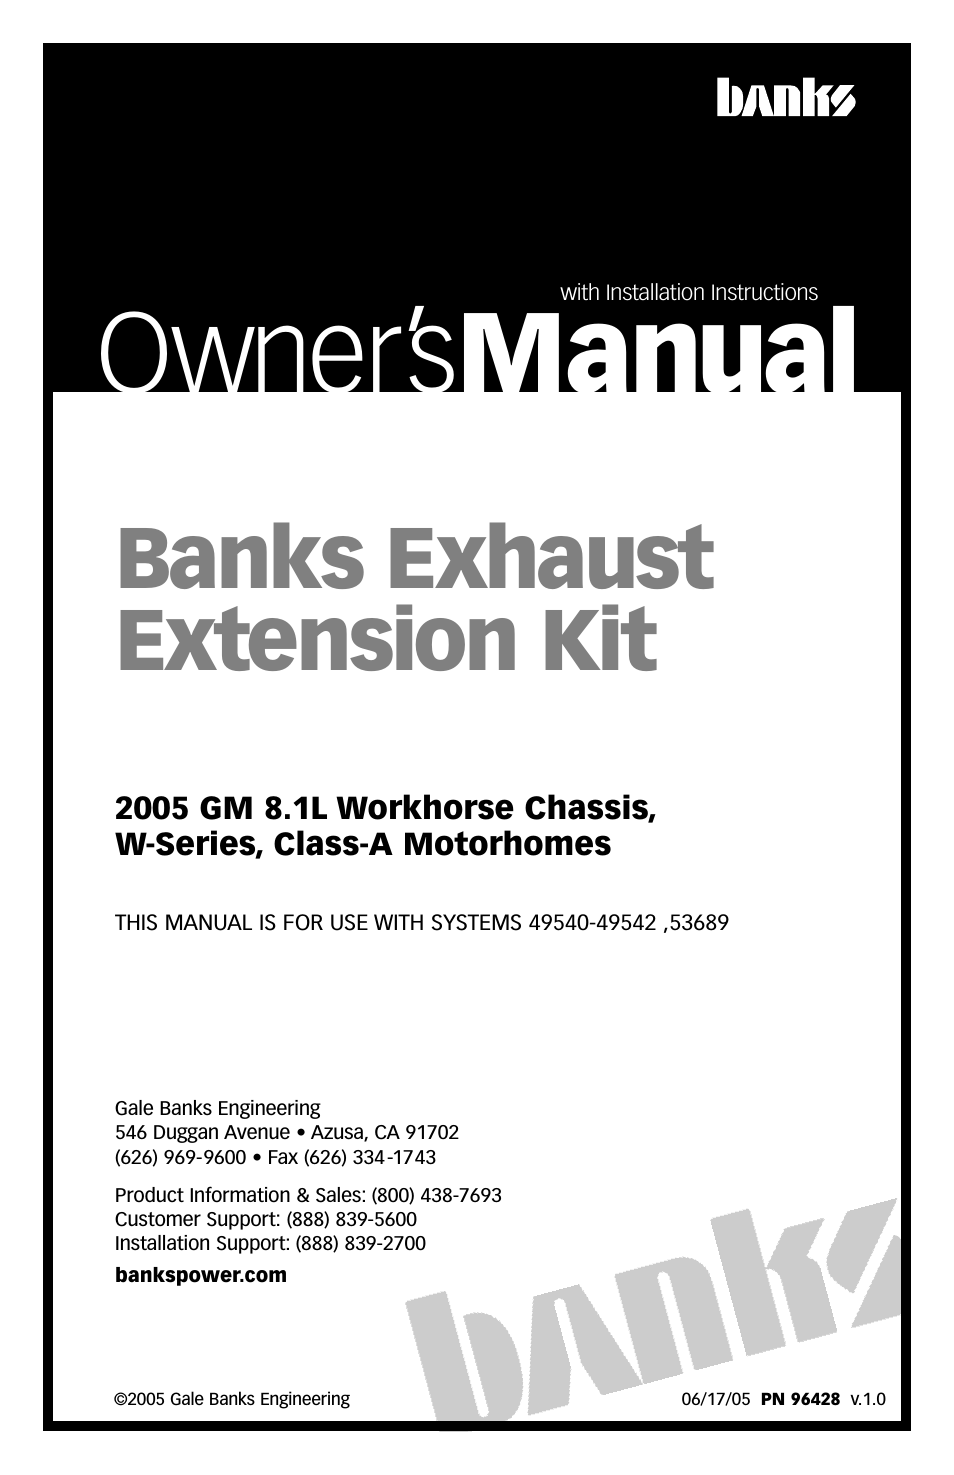 GM Motorhomes: (Gas ’01 - 10 8.1L Workhorse) Exhaust Extension Kit 2005  Class-A, Workhorse chassis, W-series